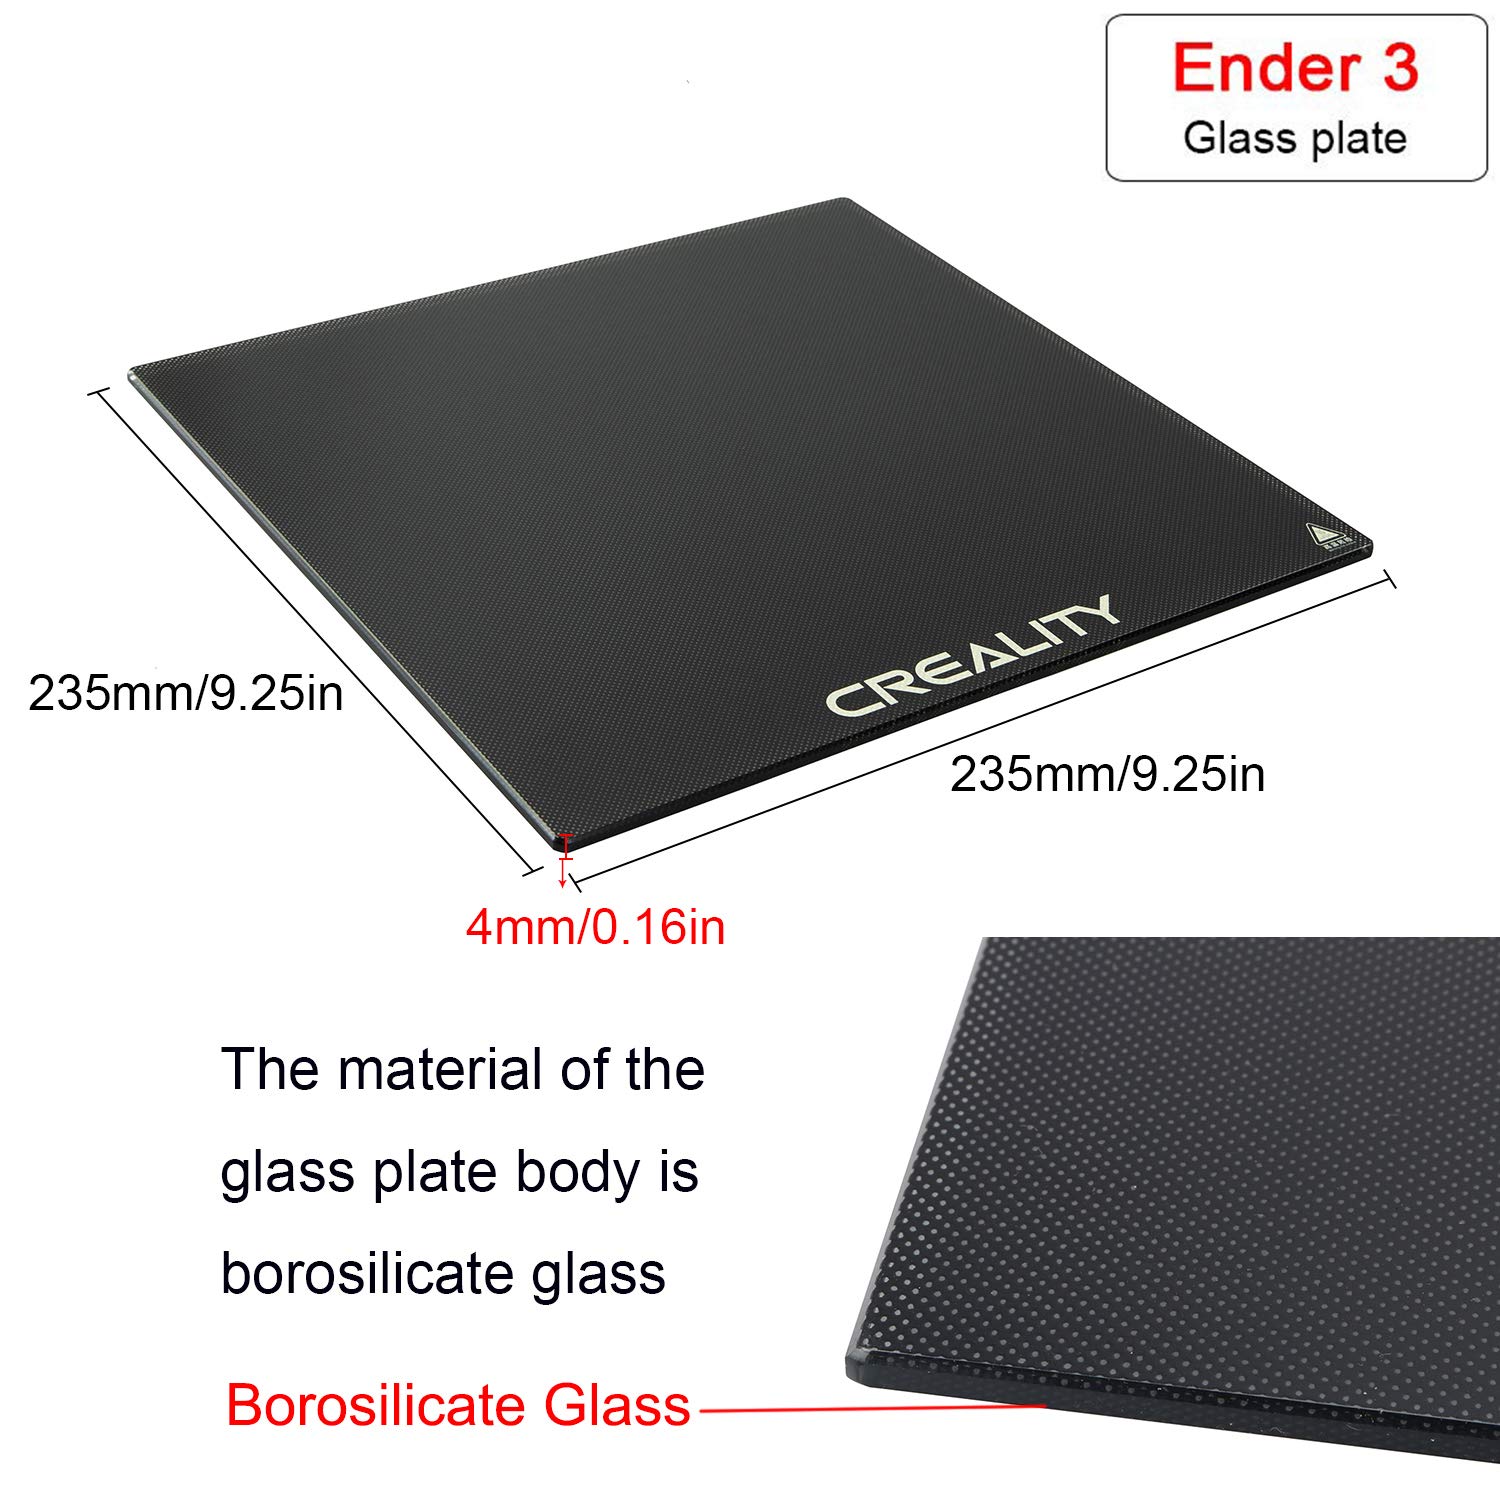 creality-ender-3-glass-bed-upgraded-build-surface-plate-235x235x4mm-3 Creality Ender 3 Glass Bed Review